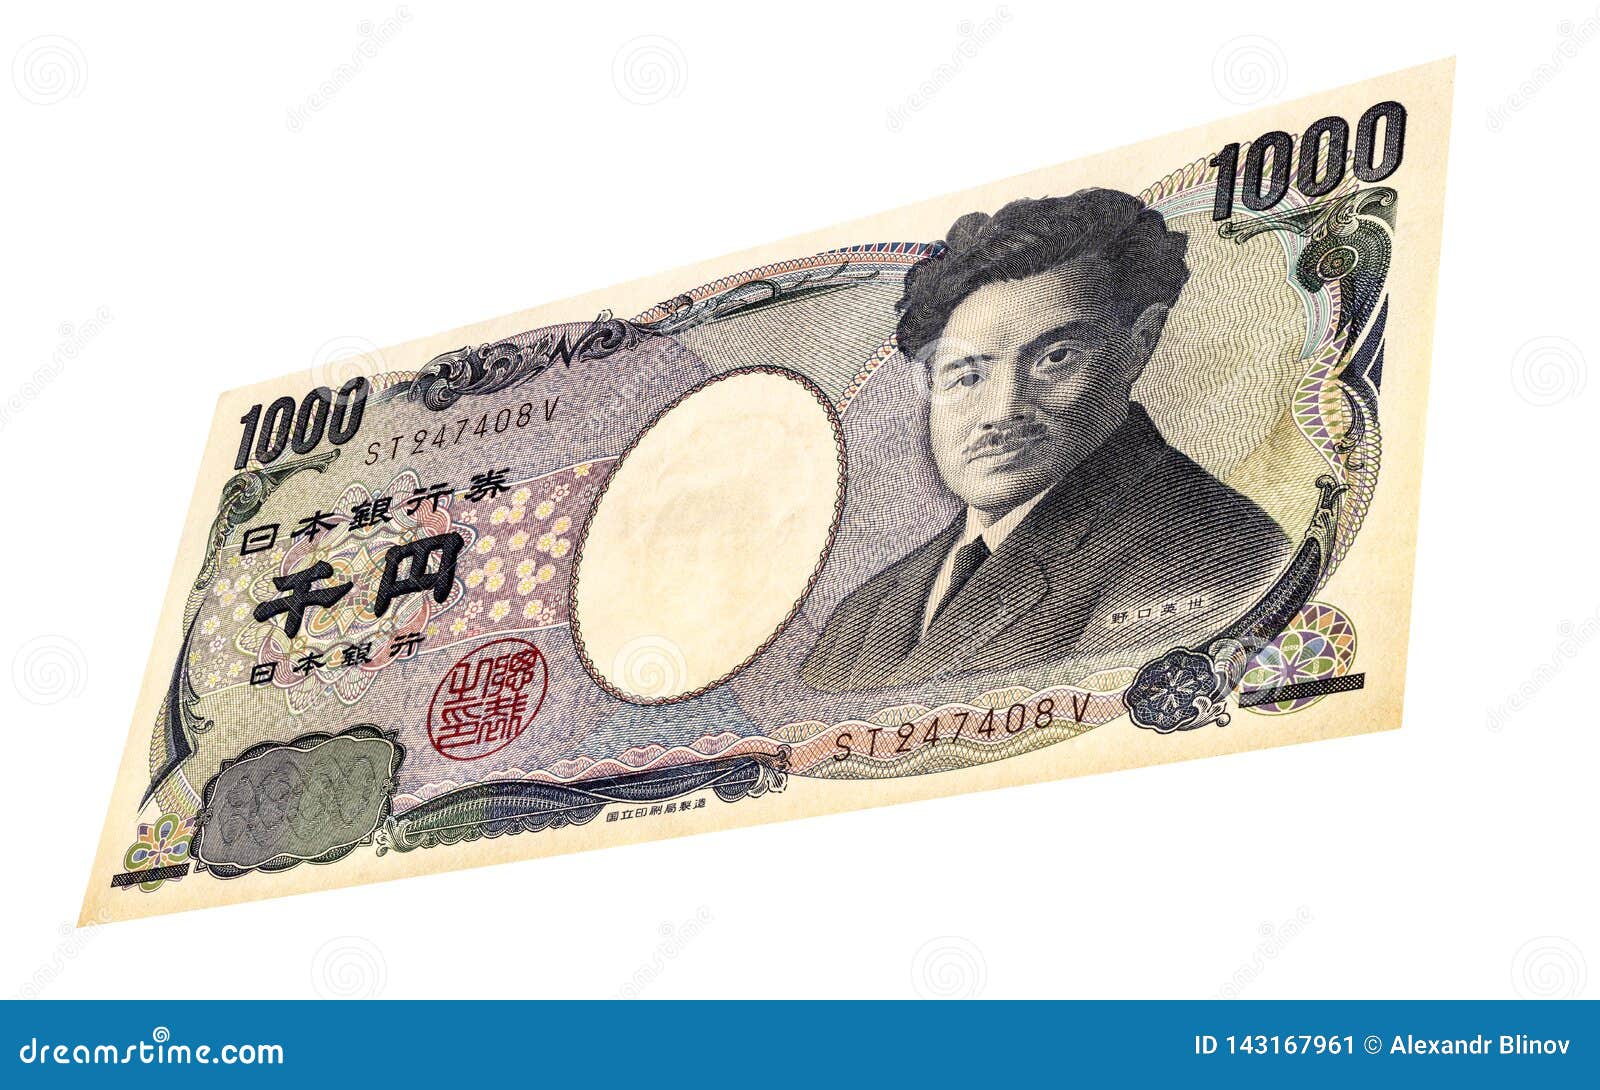 New Japanese banknotes to feature Hokusai's 'Great Wave' | CNN